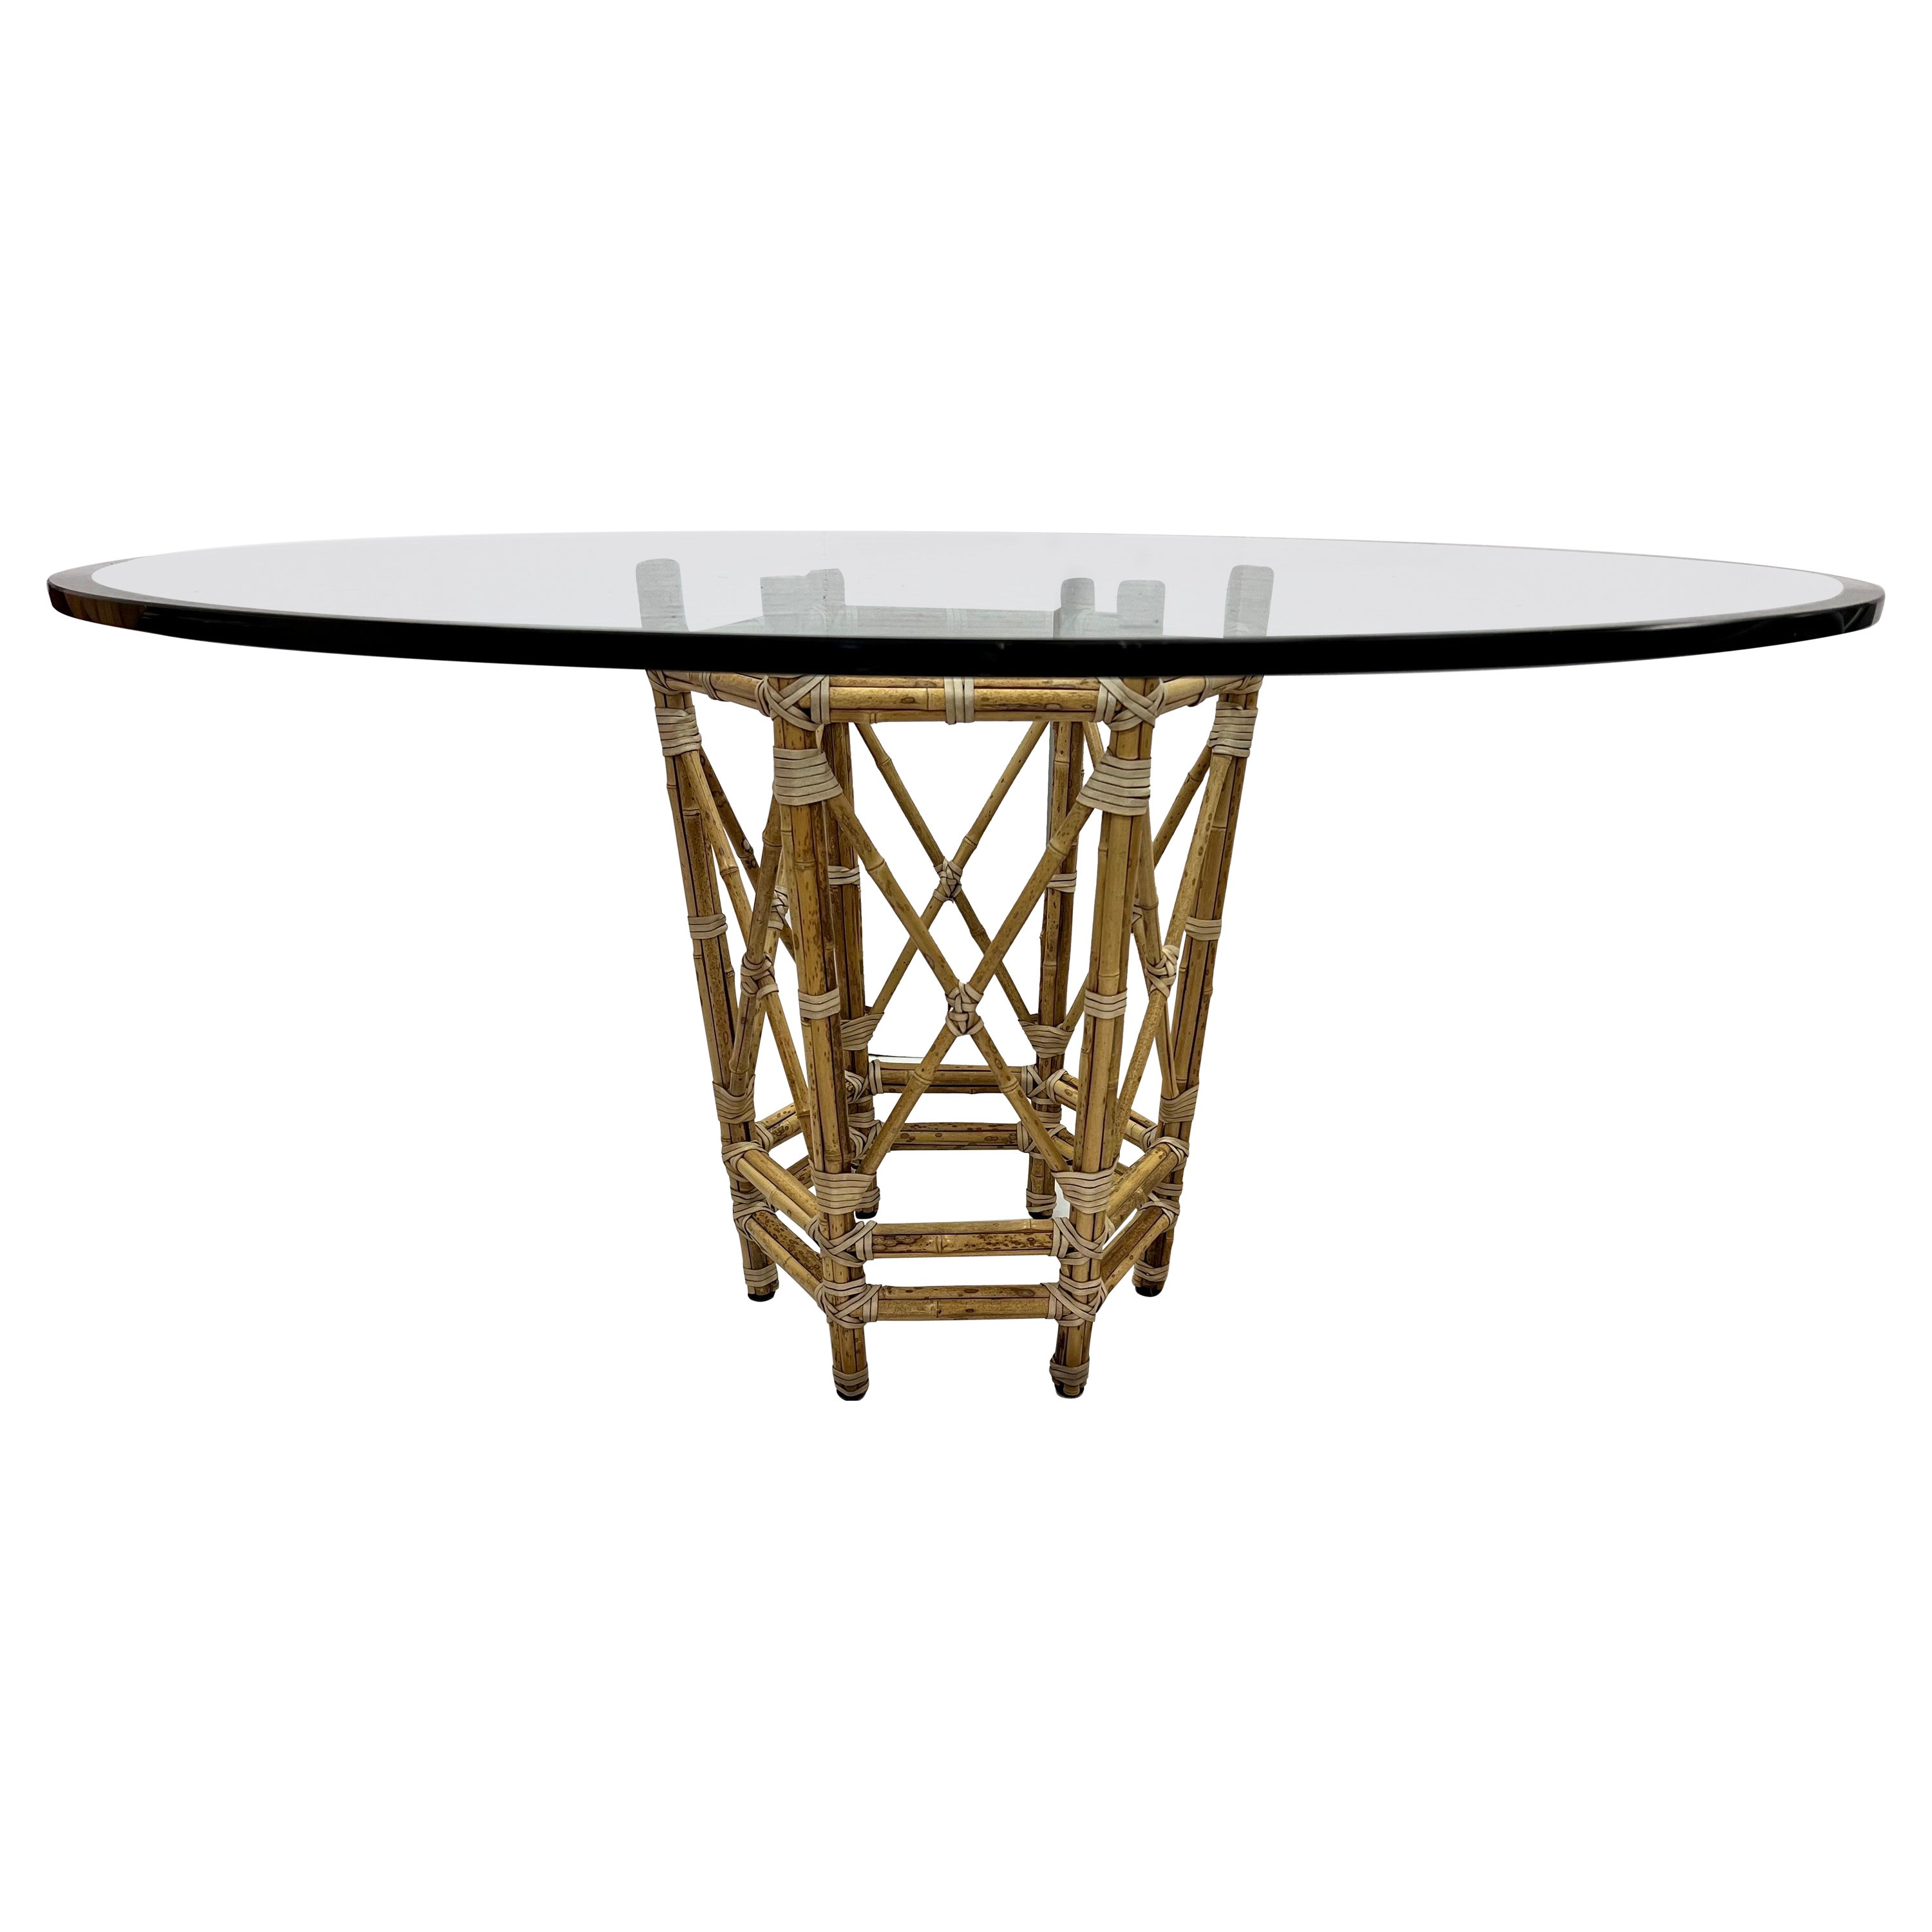 McGuire Bamboo Table with Steel Supports and Glass Top